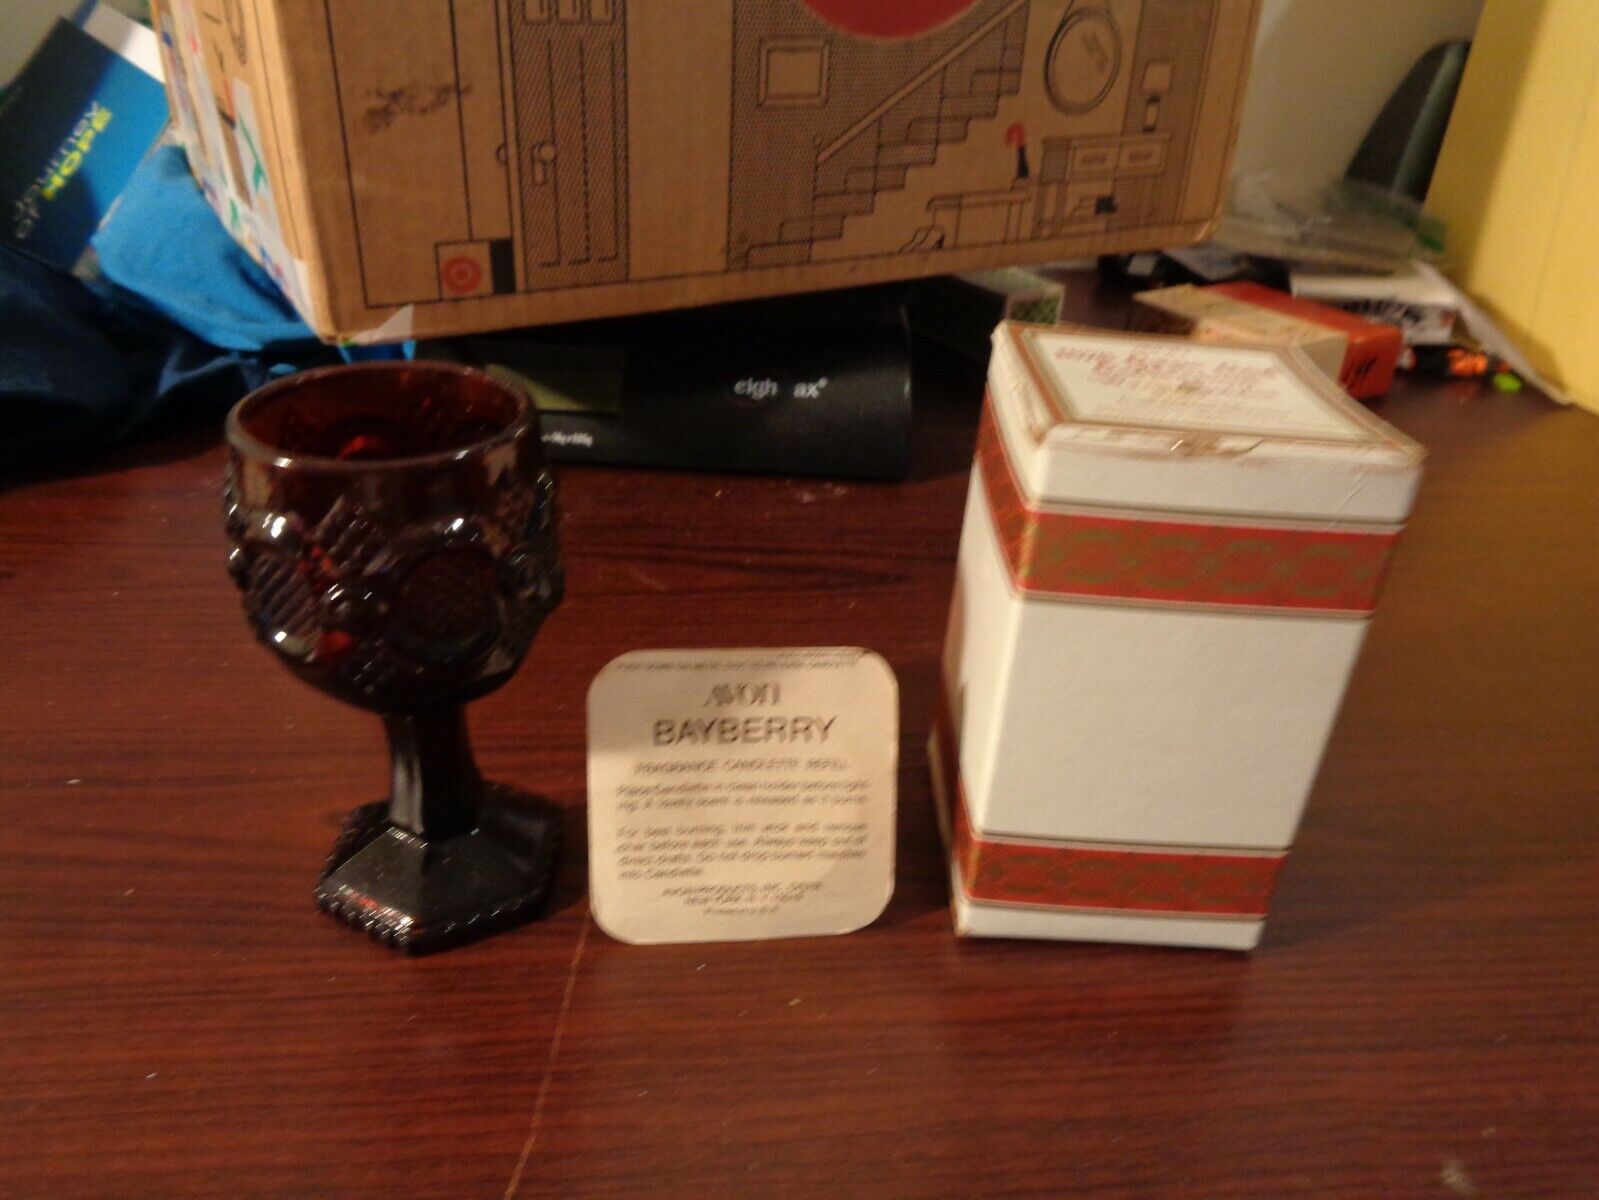  Avon 1876 Cape Cod Collection Wine Goblet Candle Holder w/Bayberry Scent